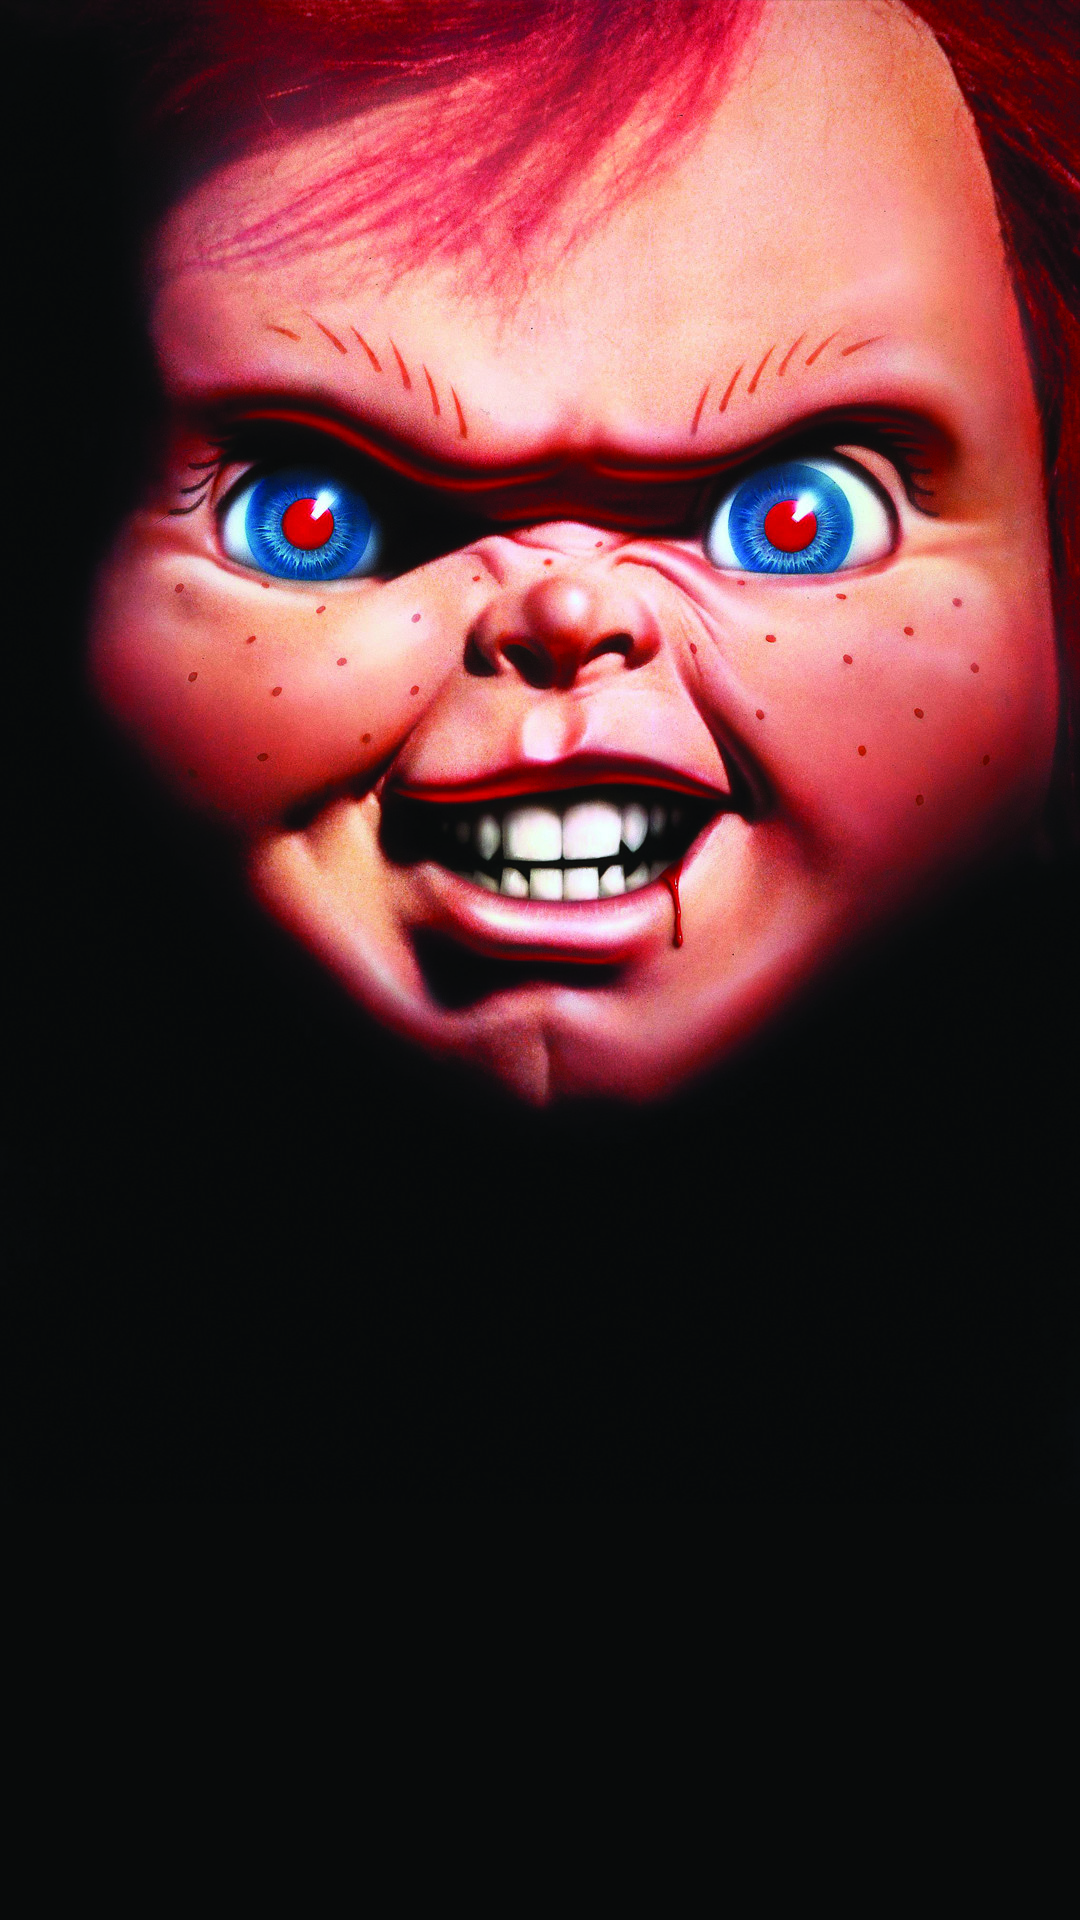 Chucky Scary Doll Android Wallpaper free download